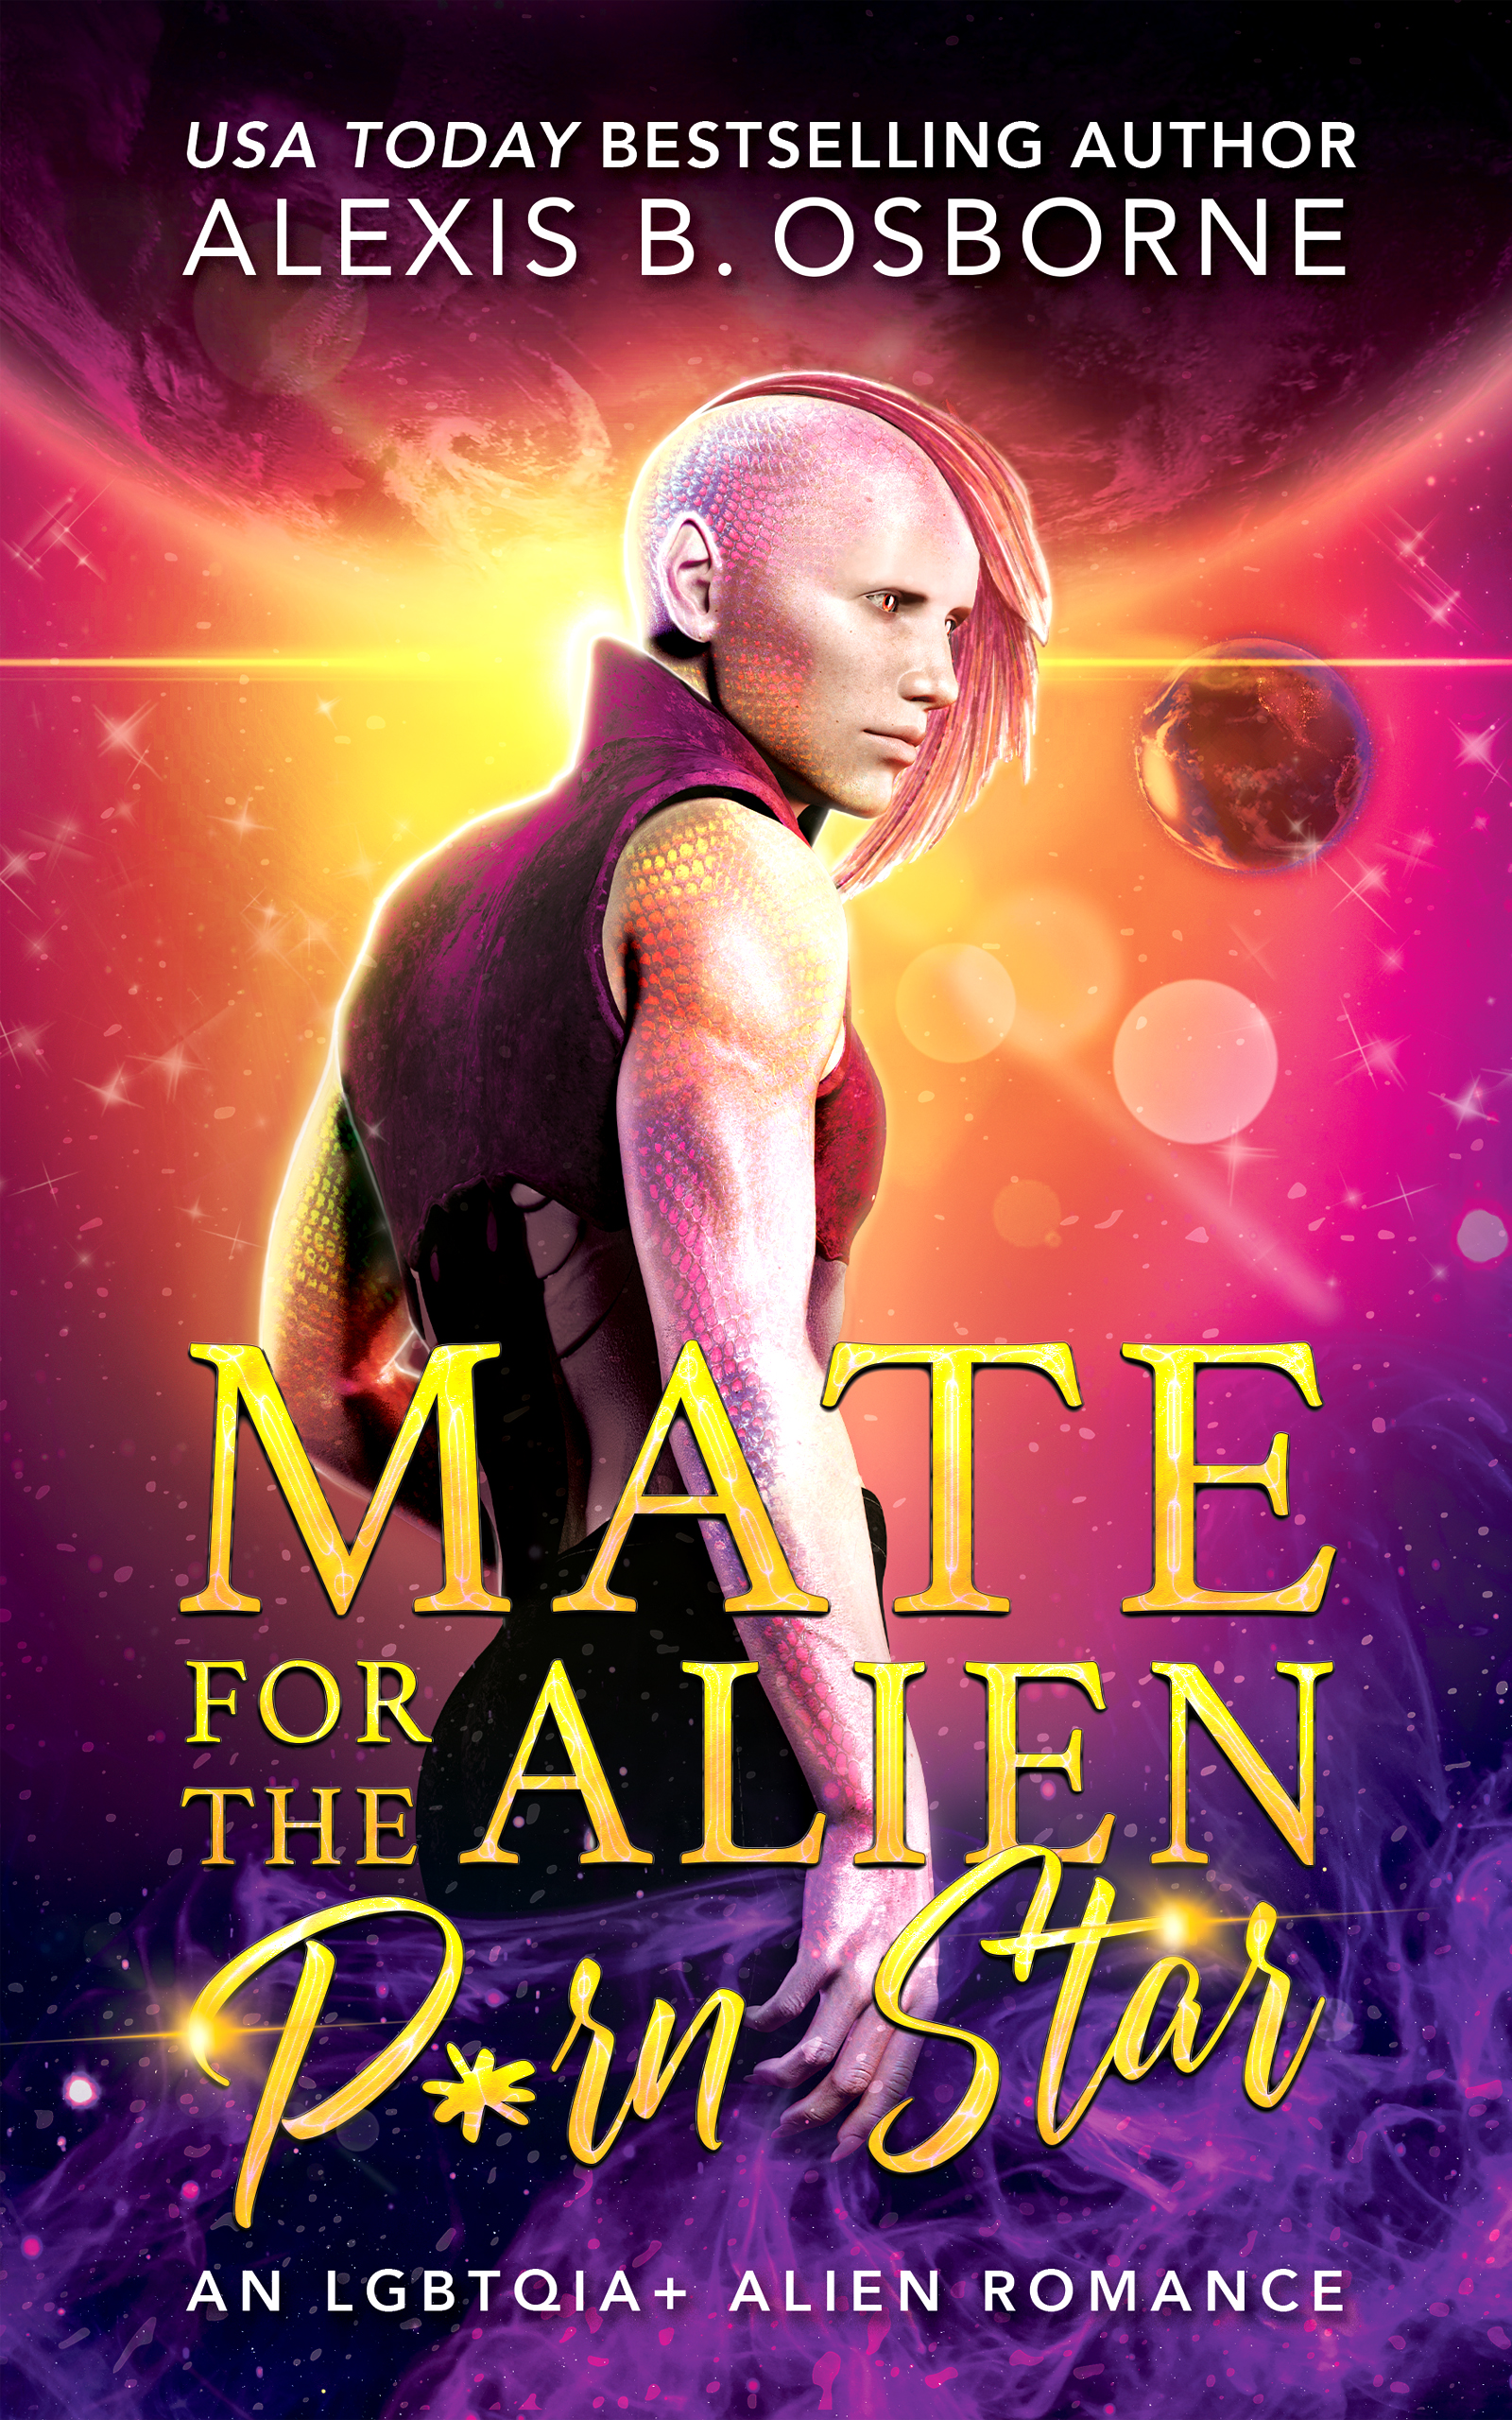 cover for the book mate for the alien porn star